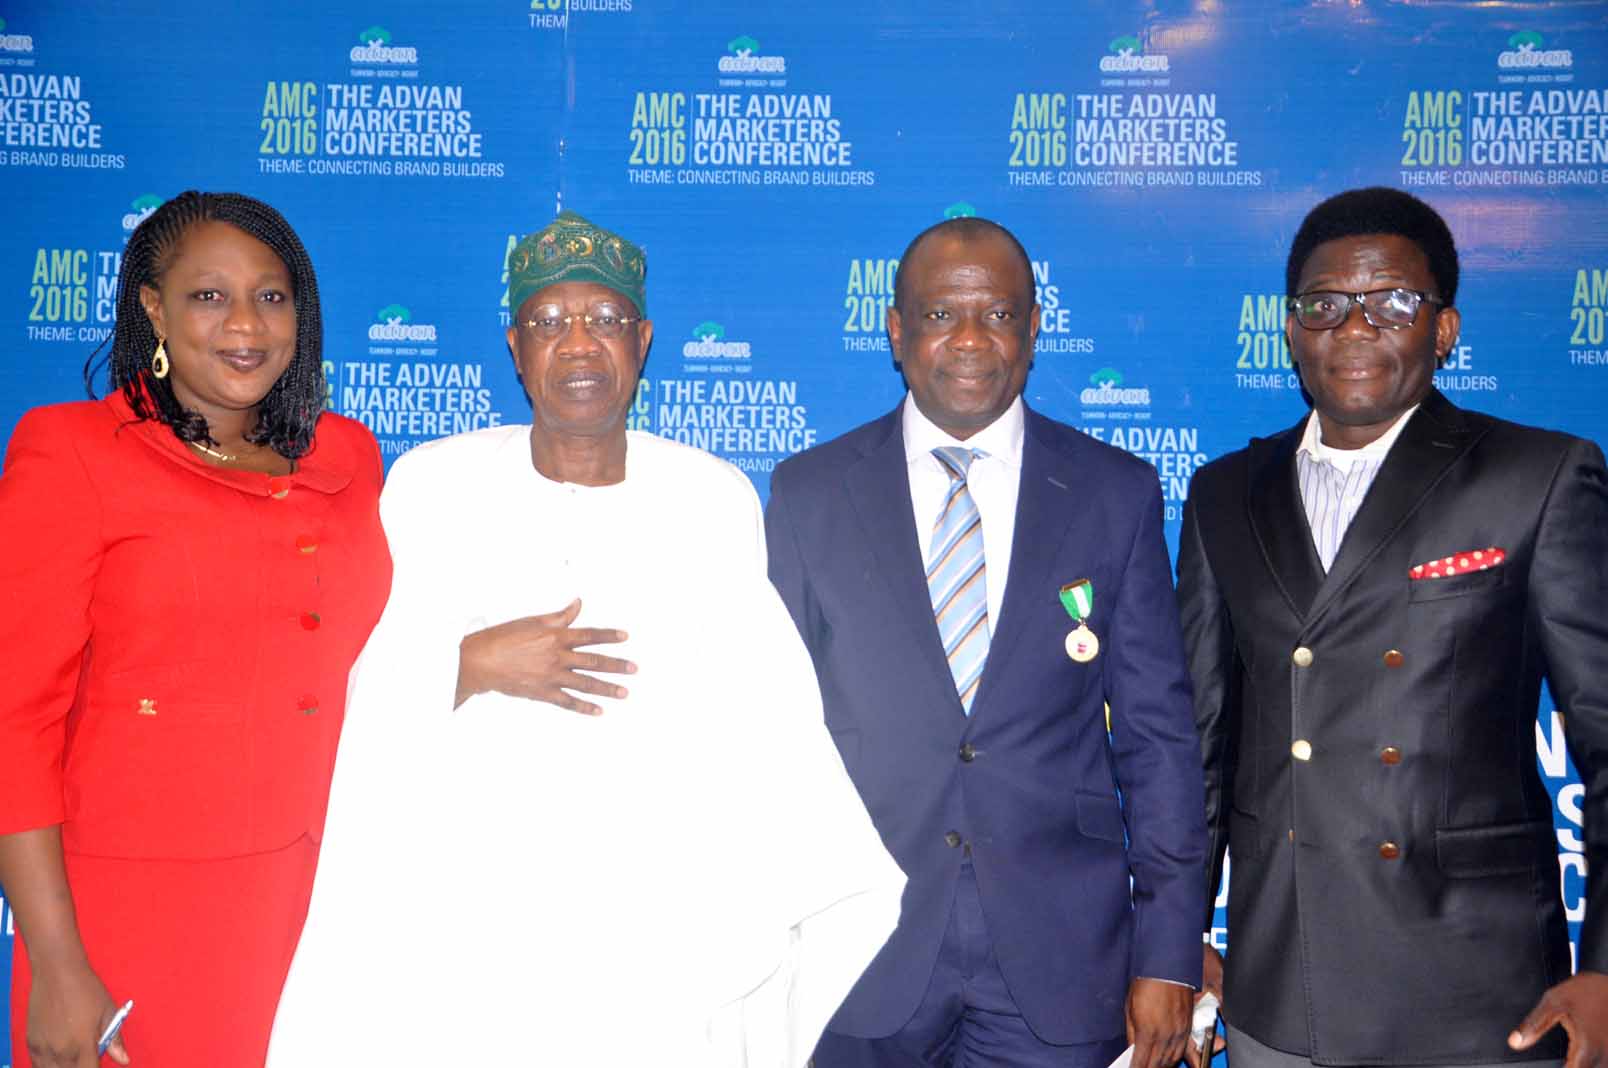 From left: Mrs Ediri Ose-Ediale, Executive Secretary ADVAN, Alhaji Lai Mohammed, Hon Minister of Information and Culture, Mr David Okeme, President Advertisers Association Of Nigeria (ADVAN) and Mr Allen Ose-Ediale, CEO Shepherdfield Network at the 2016 Advertisers Association of Nigeria (ADVAN) Marketers Conference with the theme: Connecting Brand Builders held at Sheraton hotel Ikeja, Lagos.